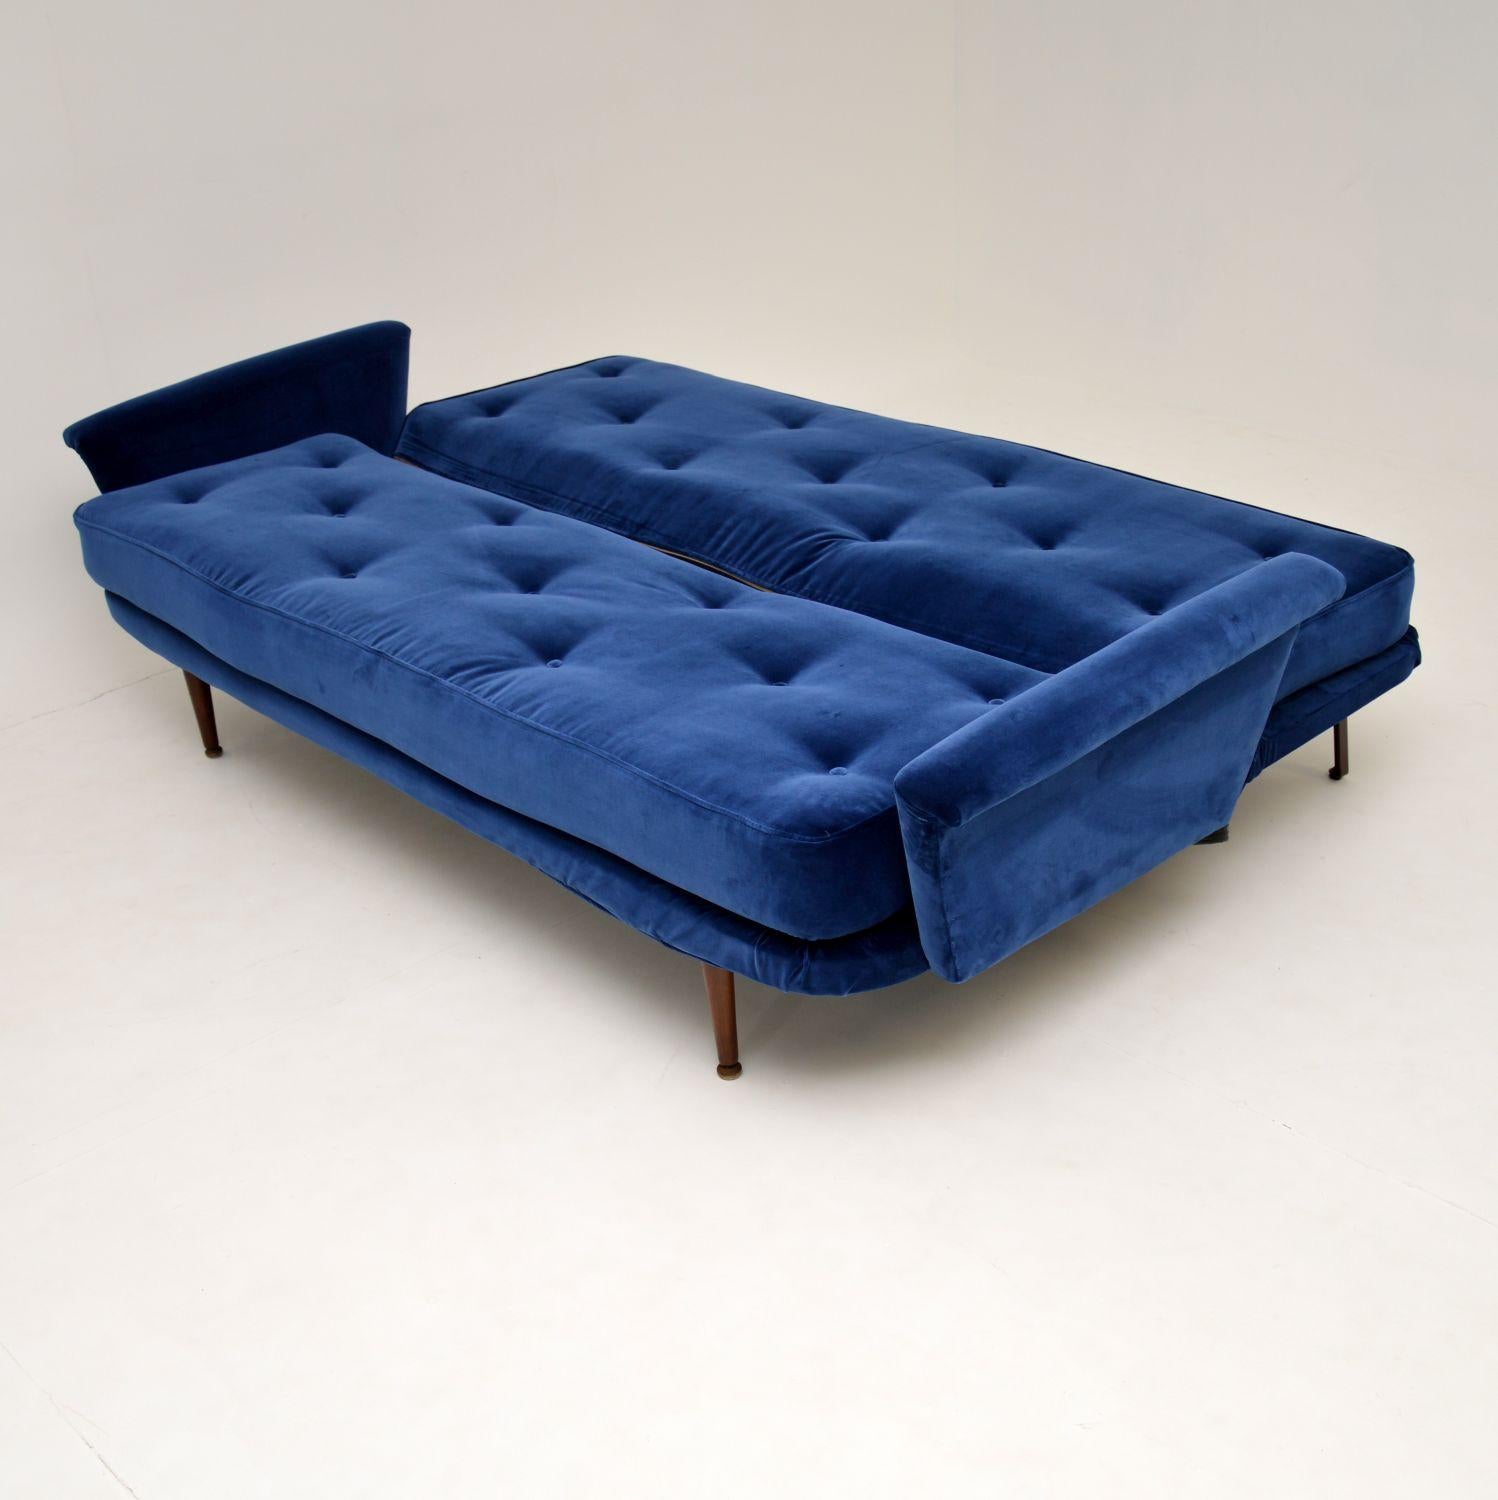 A beautiful, very well made and extremely comfortable vintage sofa bed. This dates from the 1950s, it has a beautiful design.

We have had this completely re-upholstered in a beautiful royal blue velvet fabric, the condition is superb for its